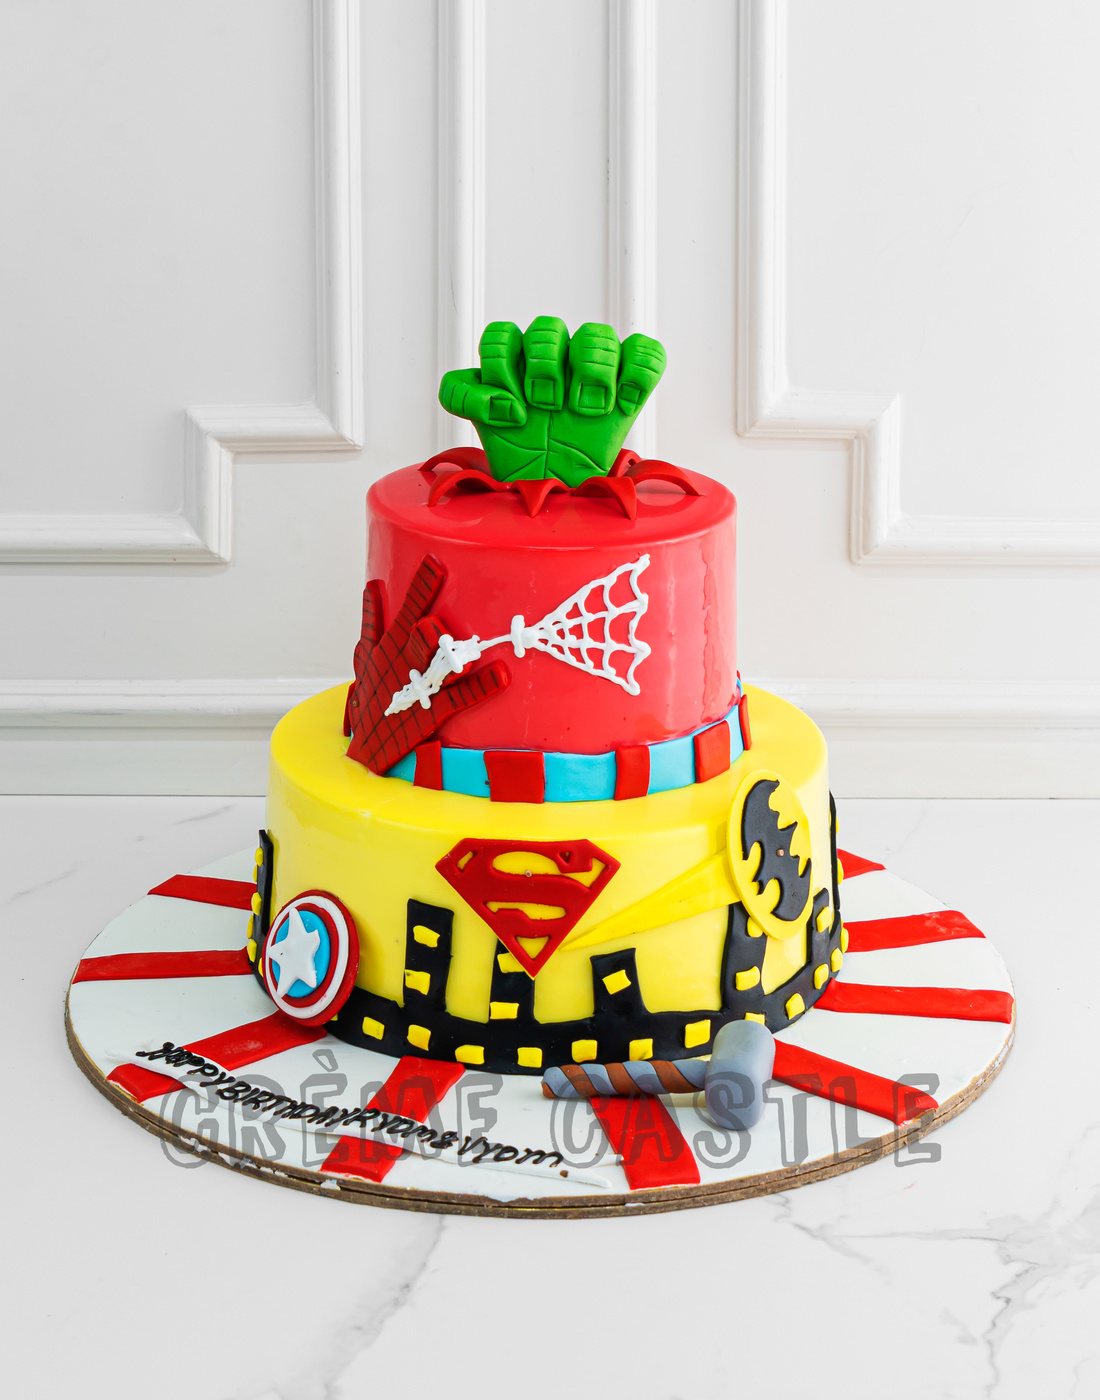 The Avengers Marvel Super Heroes Personalized Edible Cake Image Topper -  Walmart.com